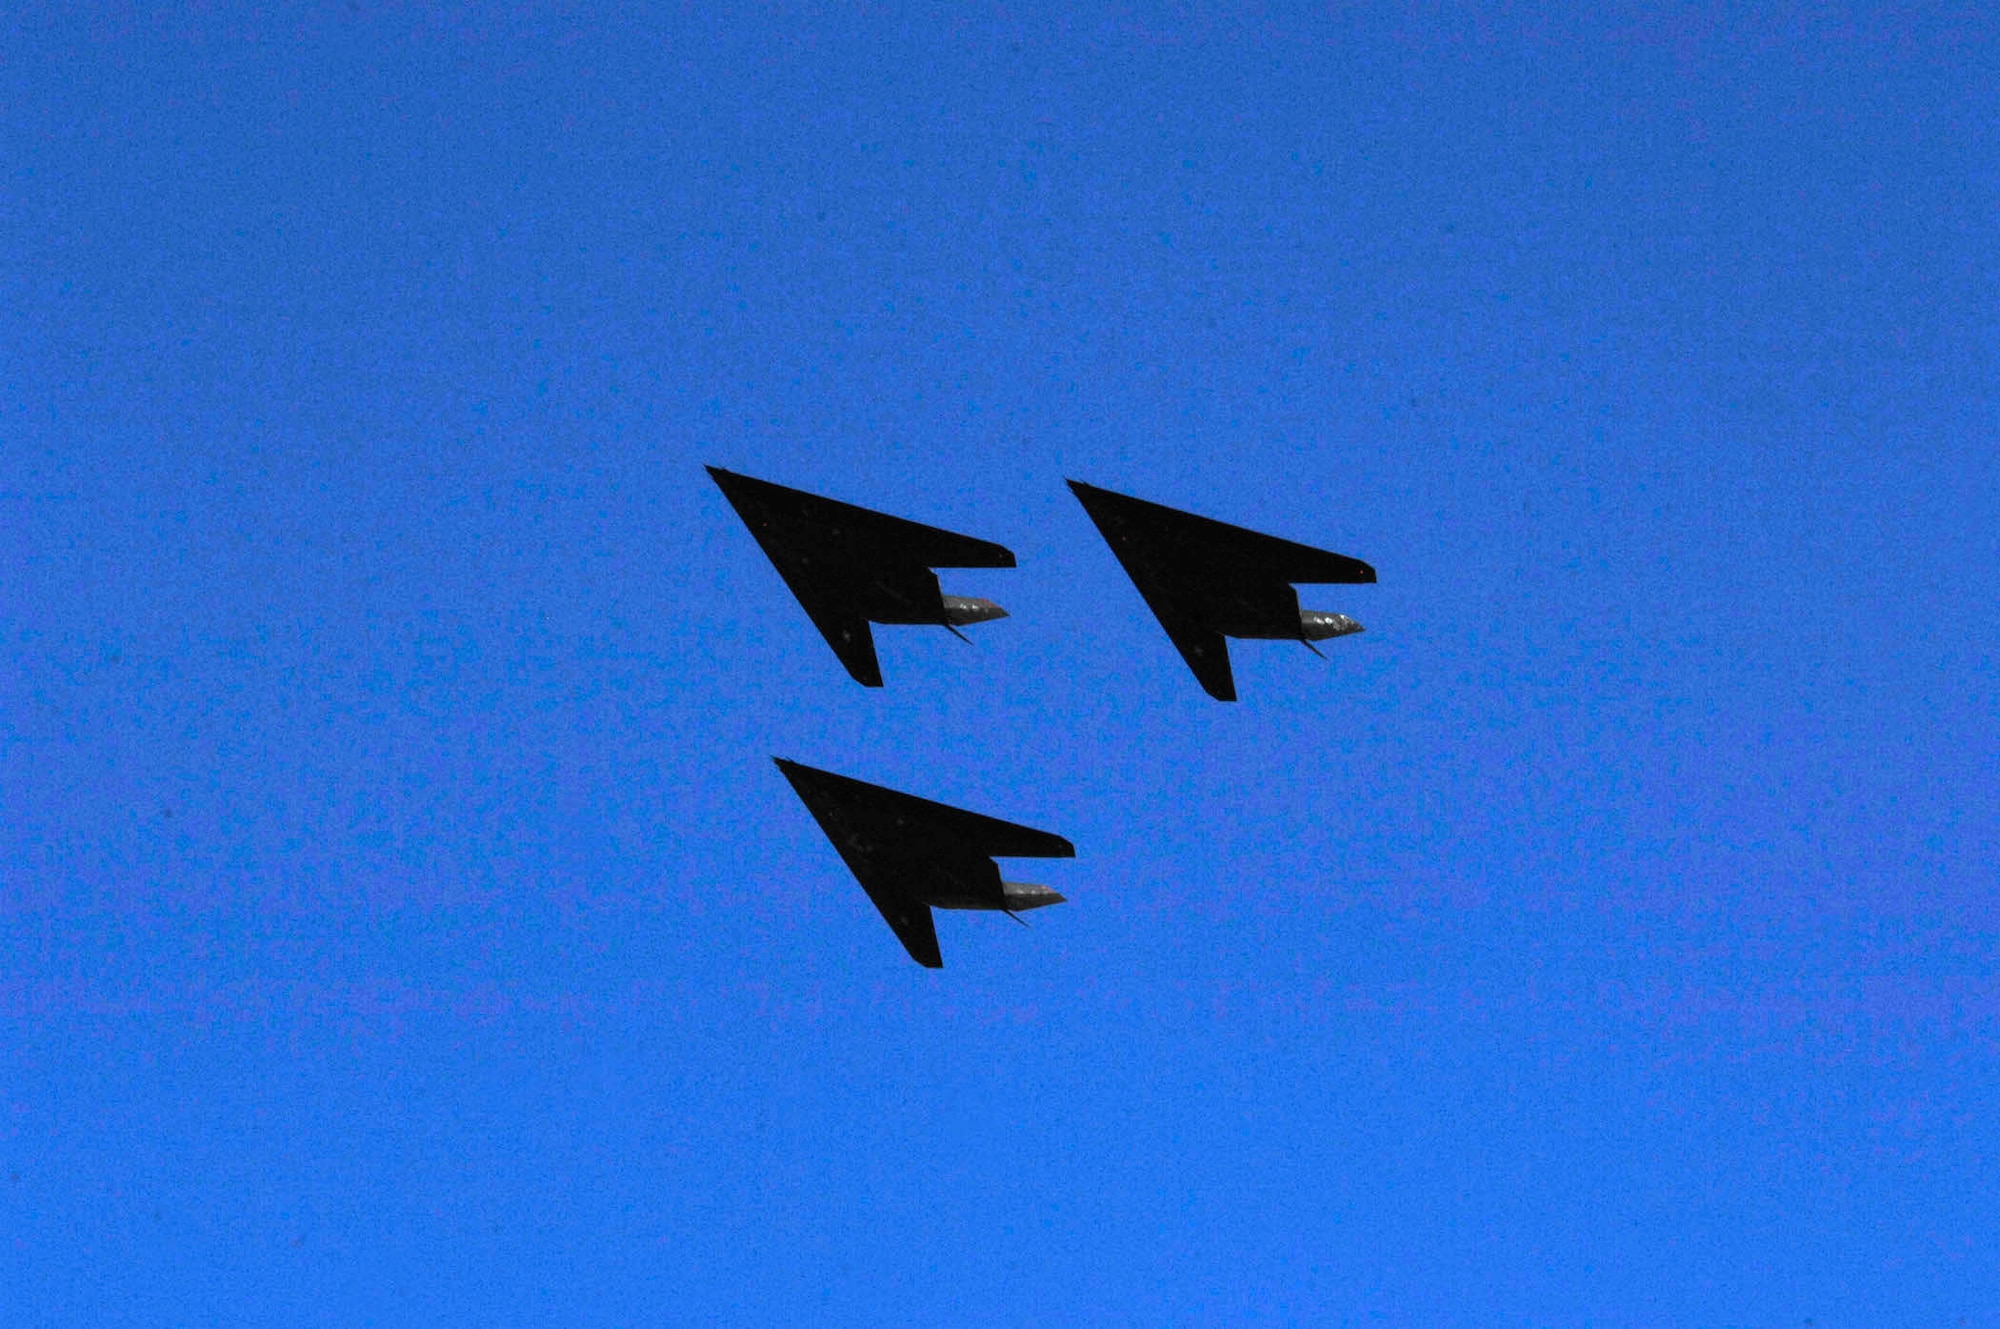 Three F-117A Nighthawks perform at the Holloman Air and Space Expo on Oct. 27, 2007. The HASE is a showcase of Air Force capabilities, the 49th Fighter Wing mission and the X Prize Foundation (U.S. Air Force Photo by Airman 1st Class Rachel Kocin)